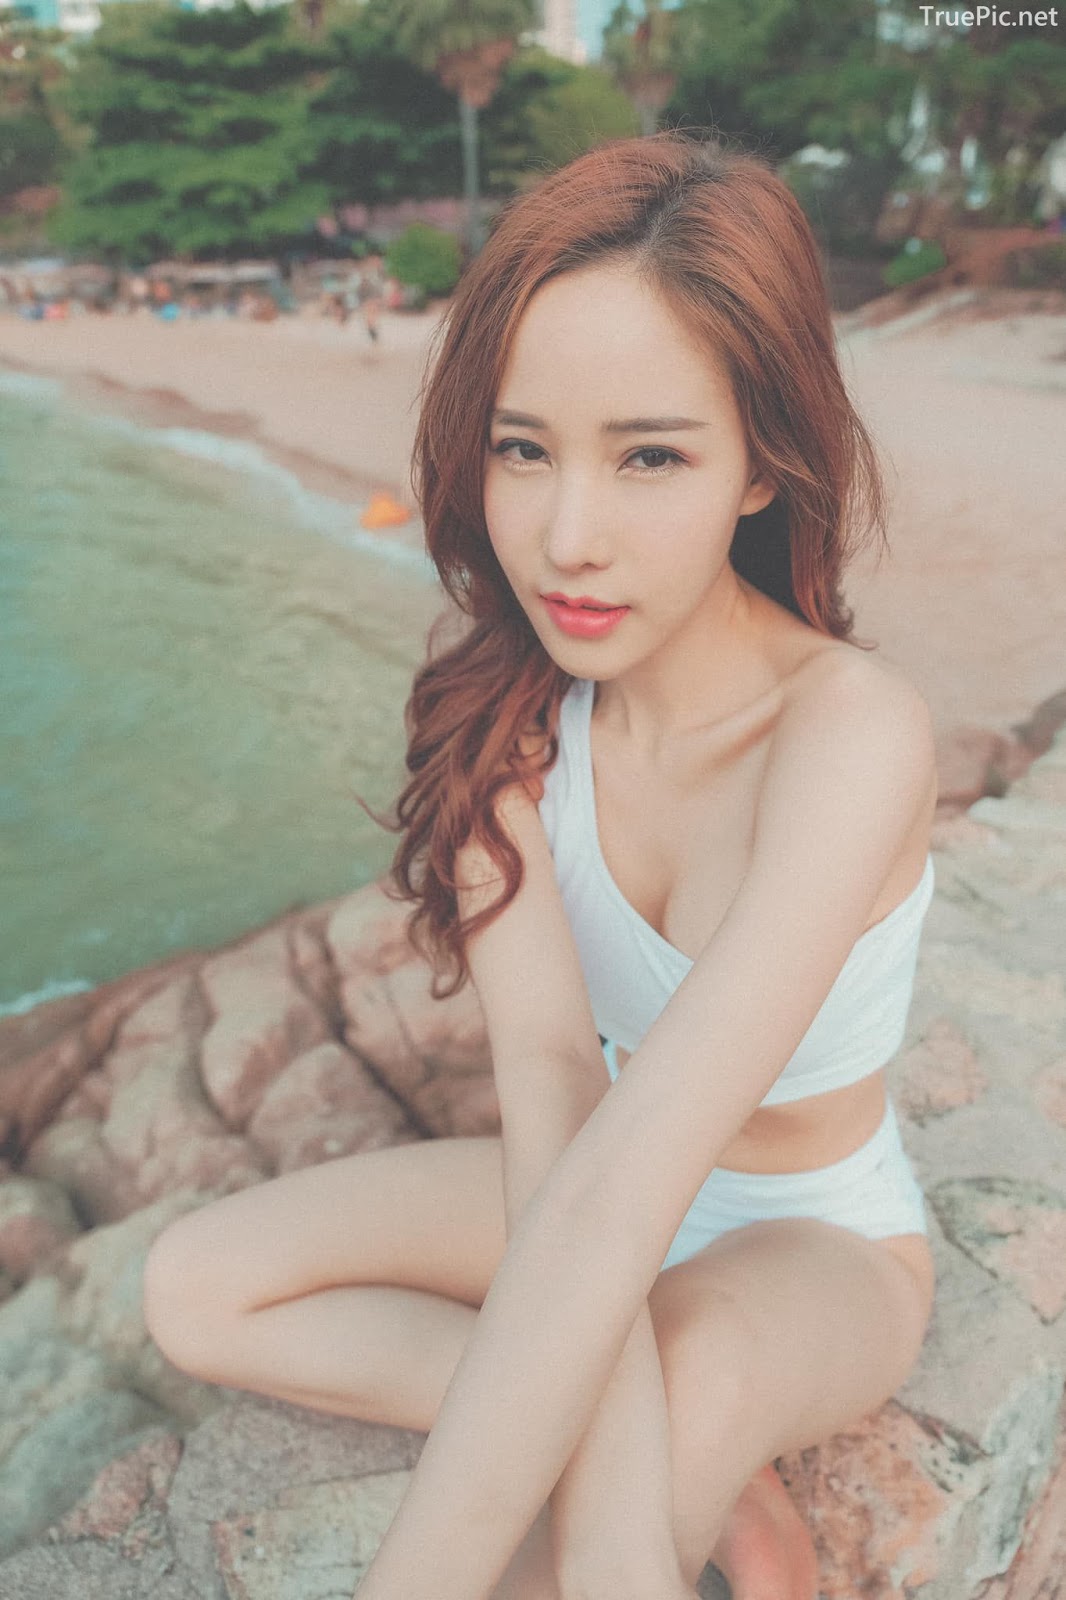 Thailand sexy model Arys Nam-in (Arysiacara) – The goddess of the sea 2 - Picture 11